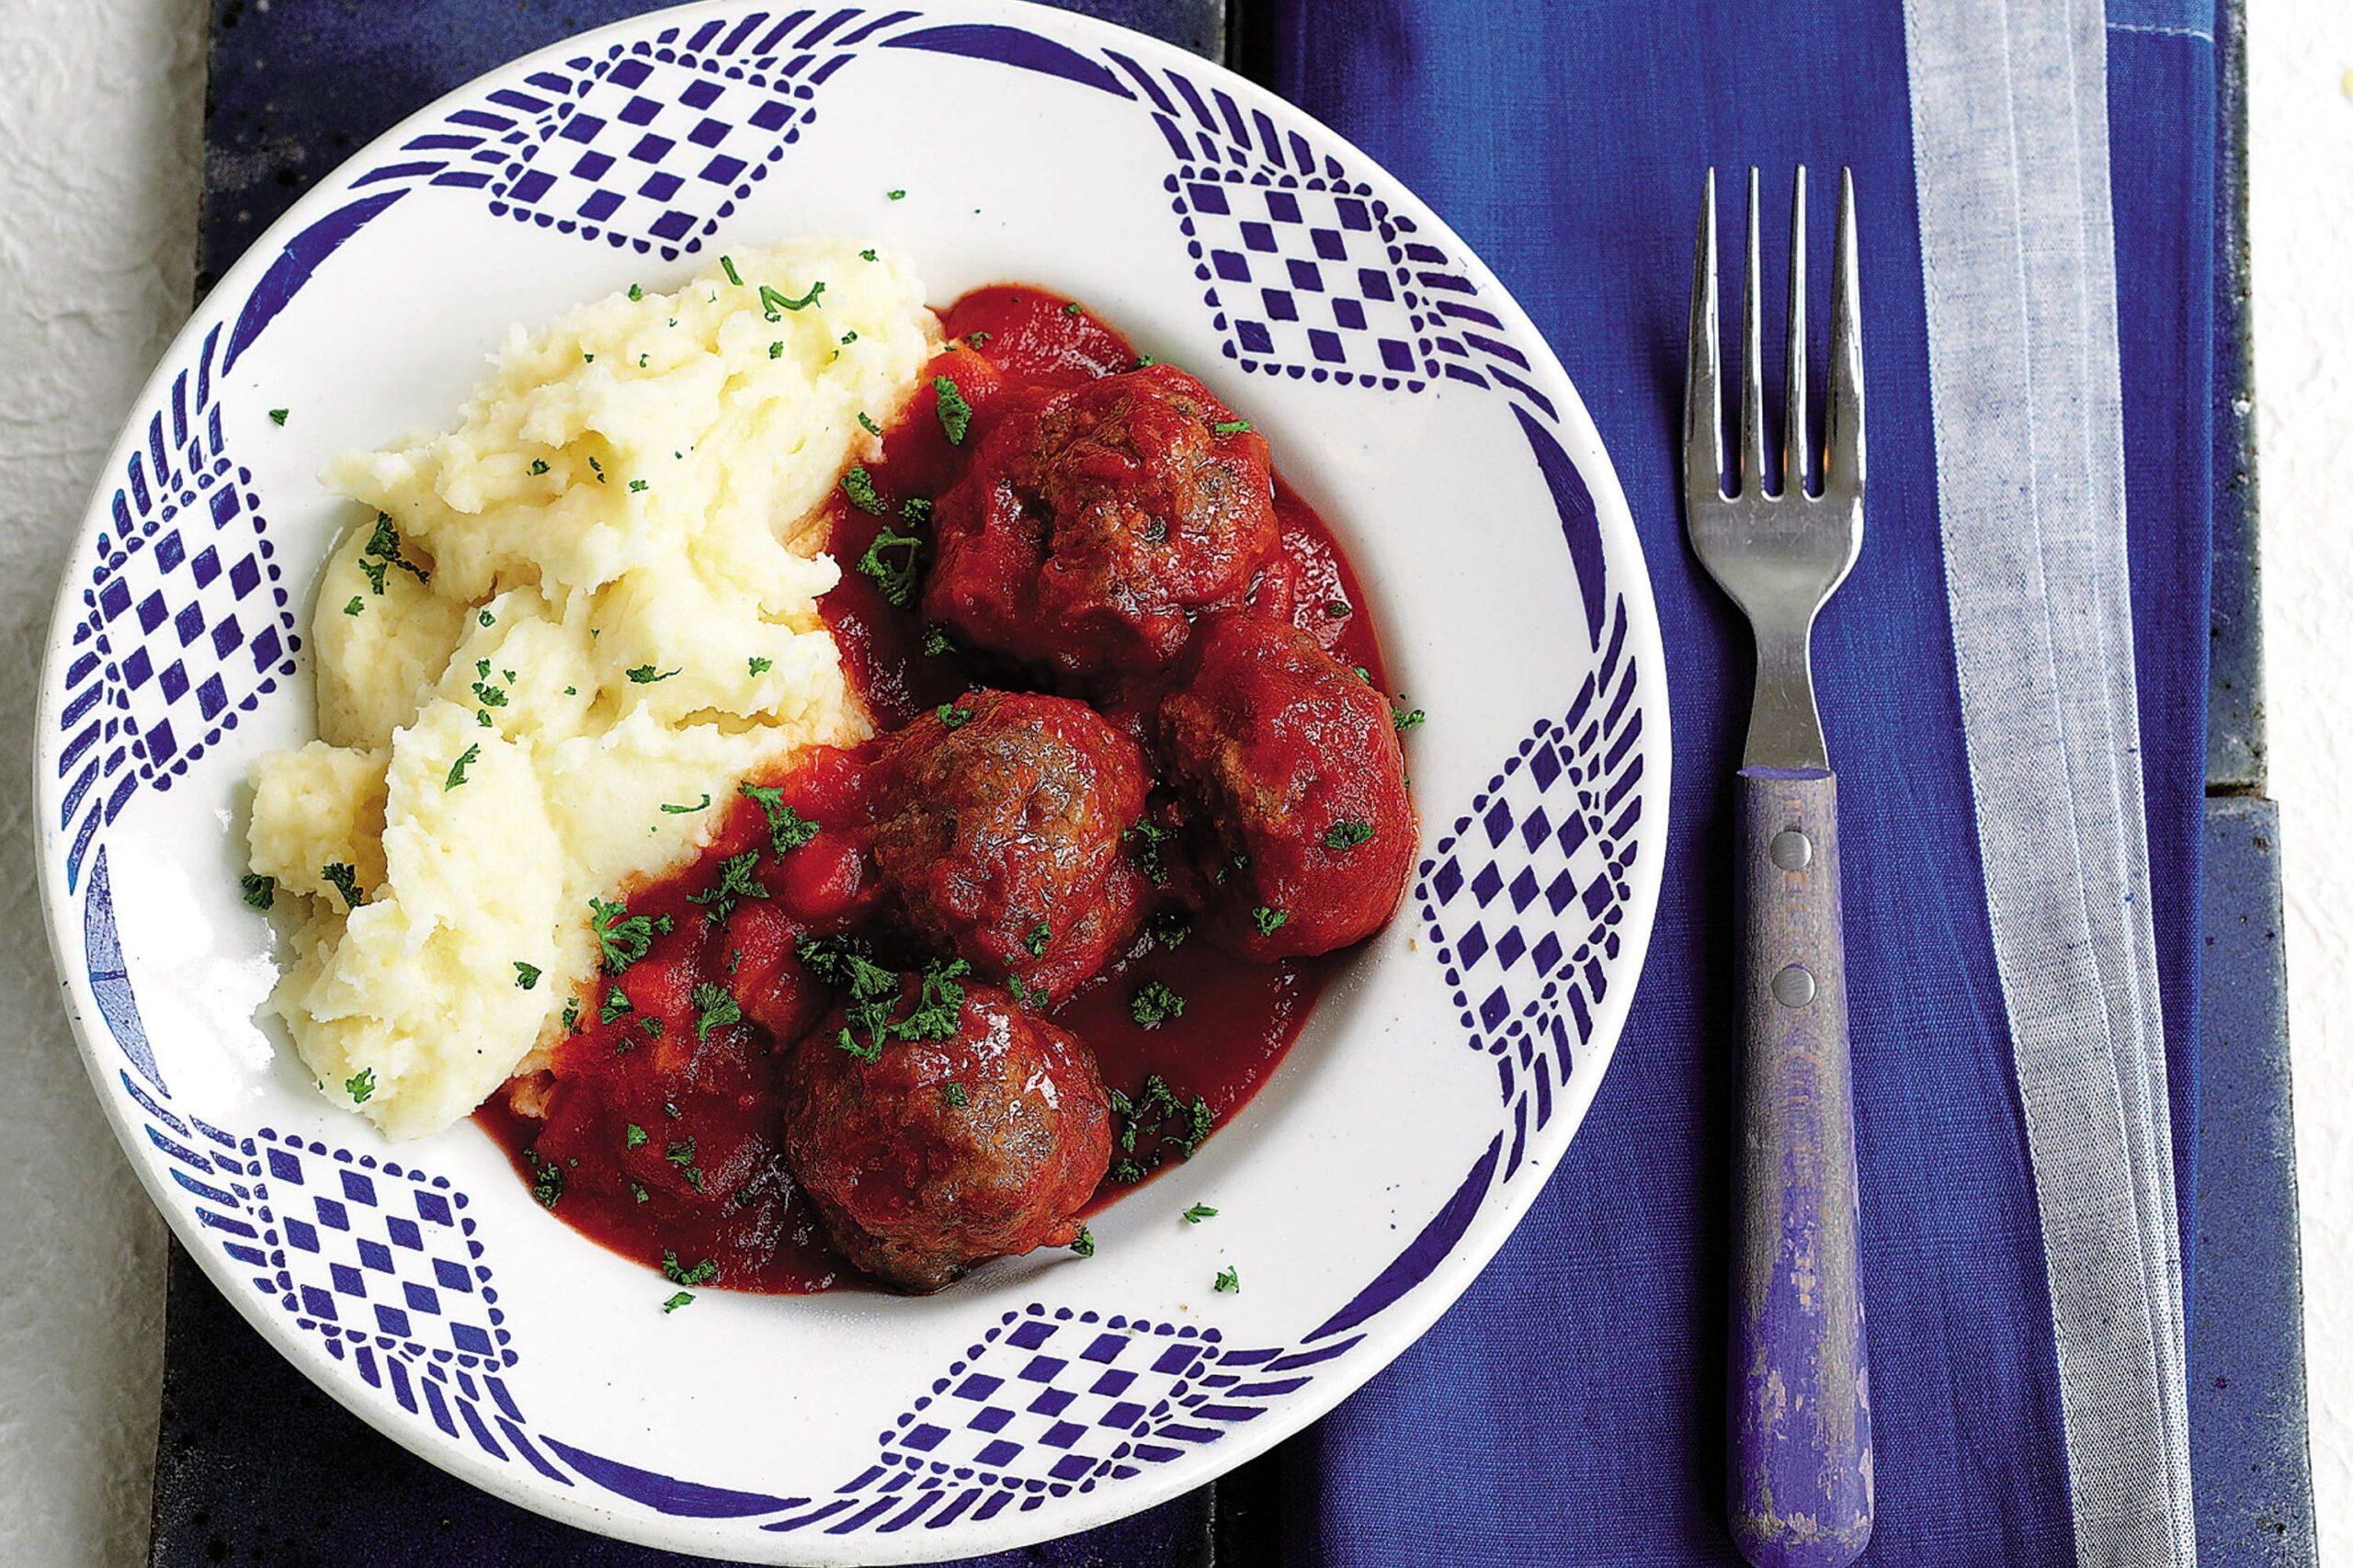  These Greek meatballs have found the ultimate exquisiteness in wine sauce!